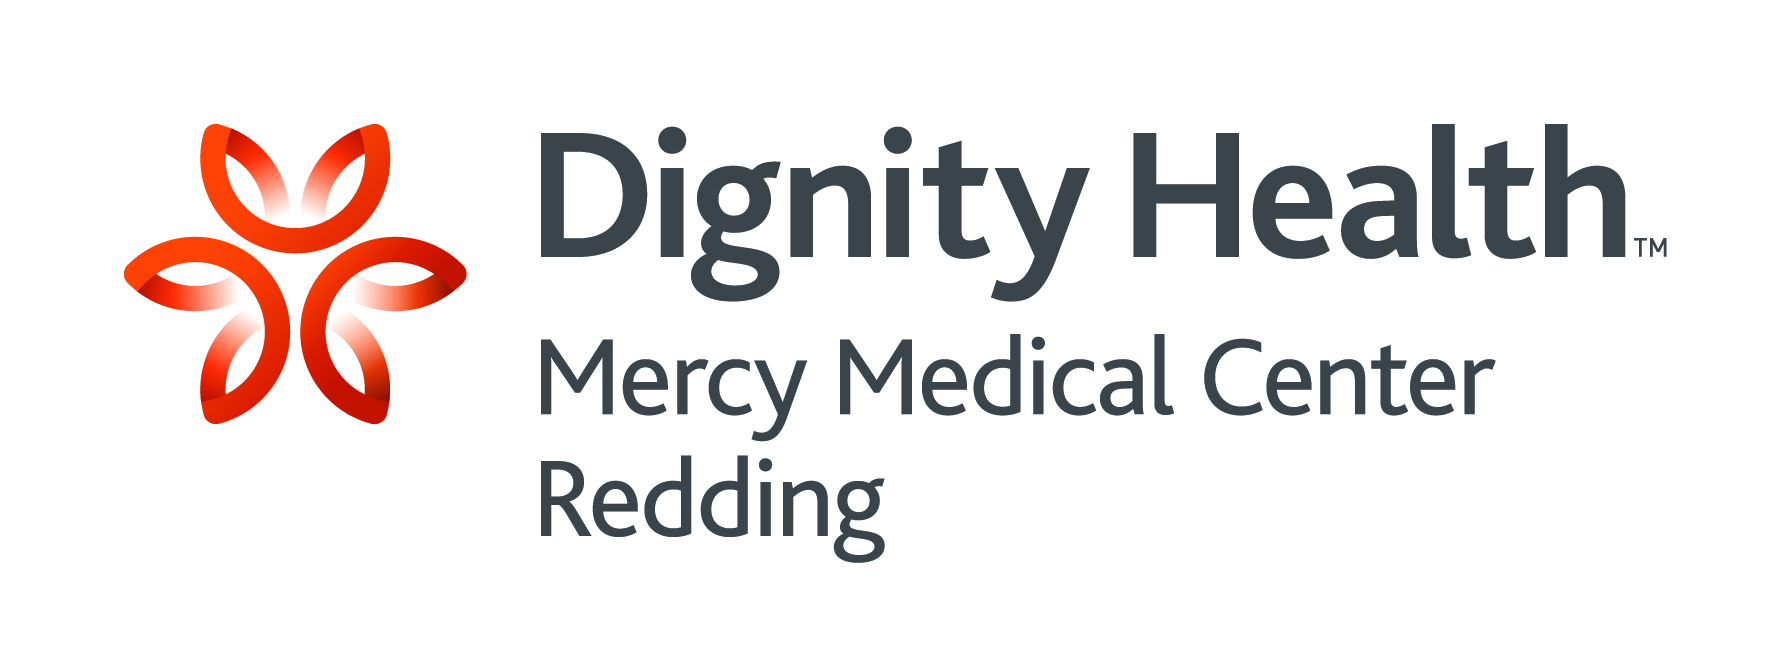 dignity health mercy medical center logo color